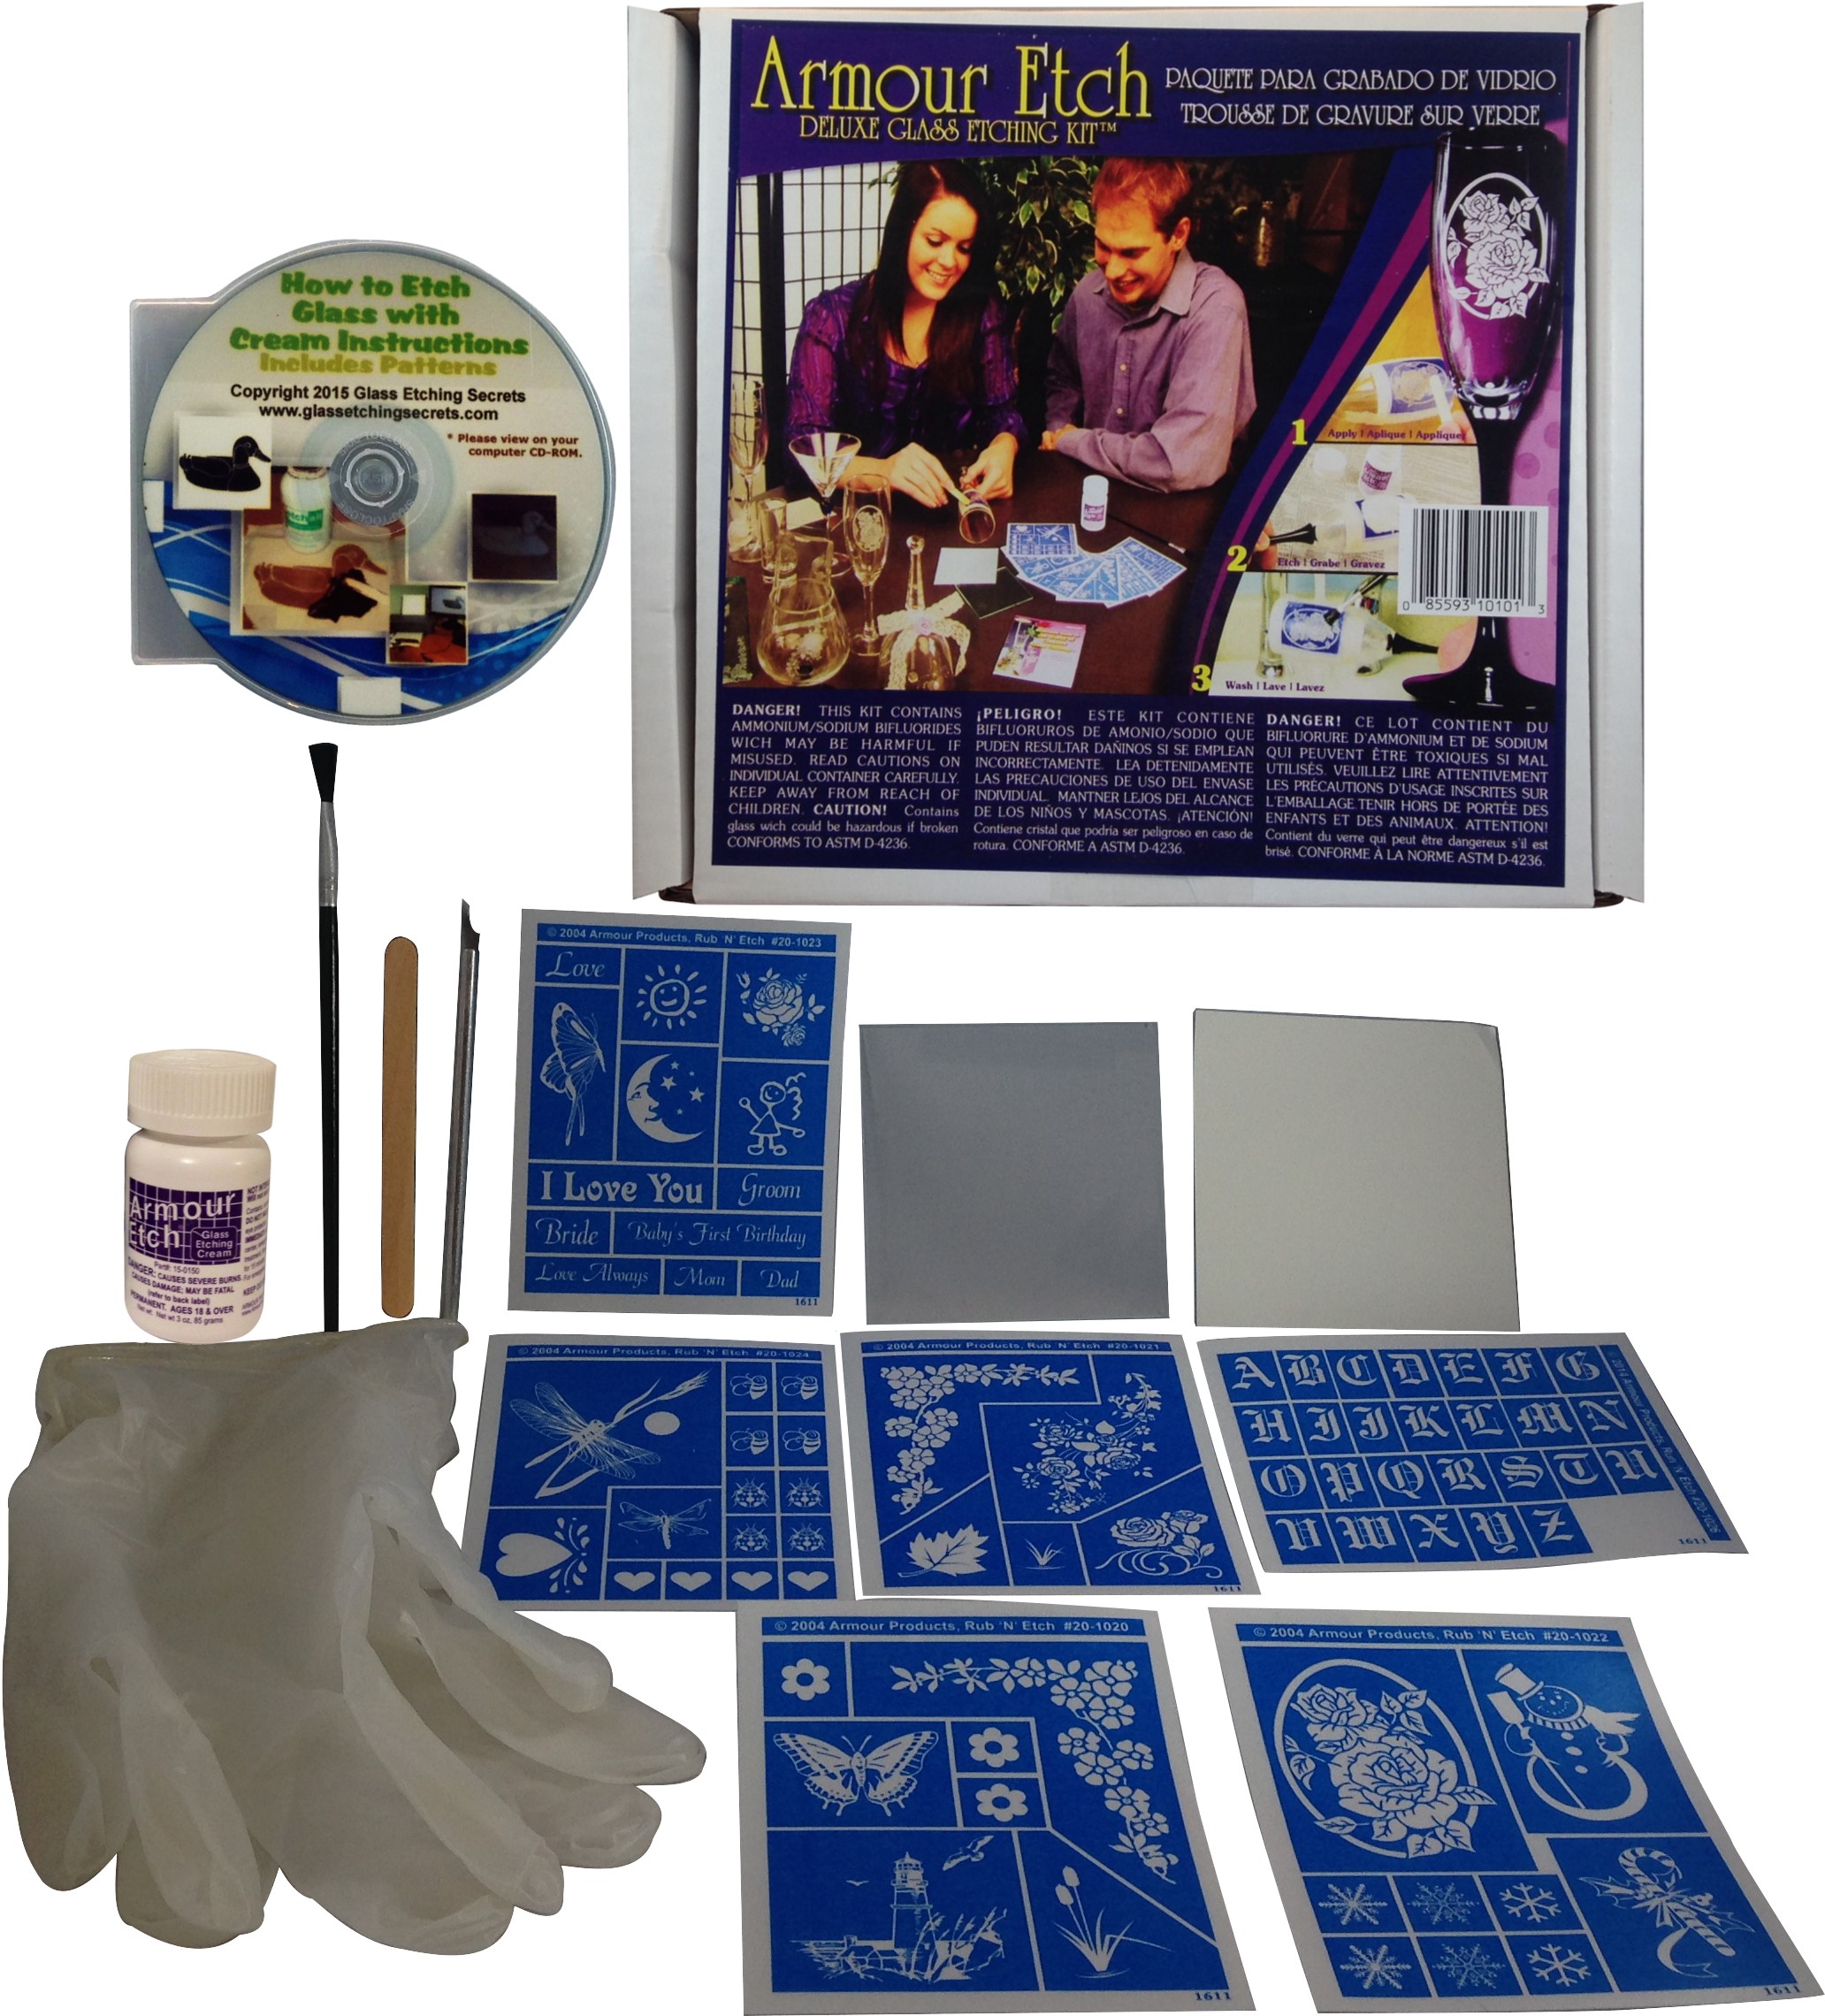 Glass Etching Kit with Cream, Reusable Stencils, Brush, Applicator, Cutter,  Gloves + Free How to Etch CD